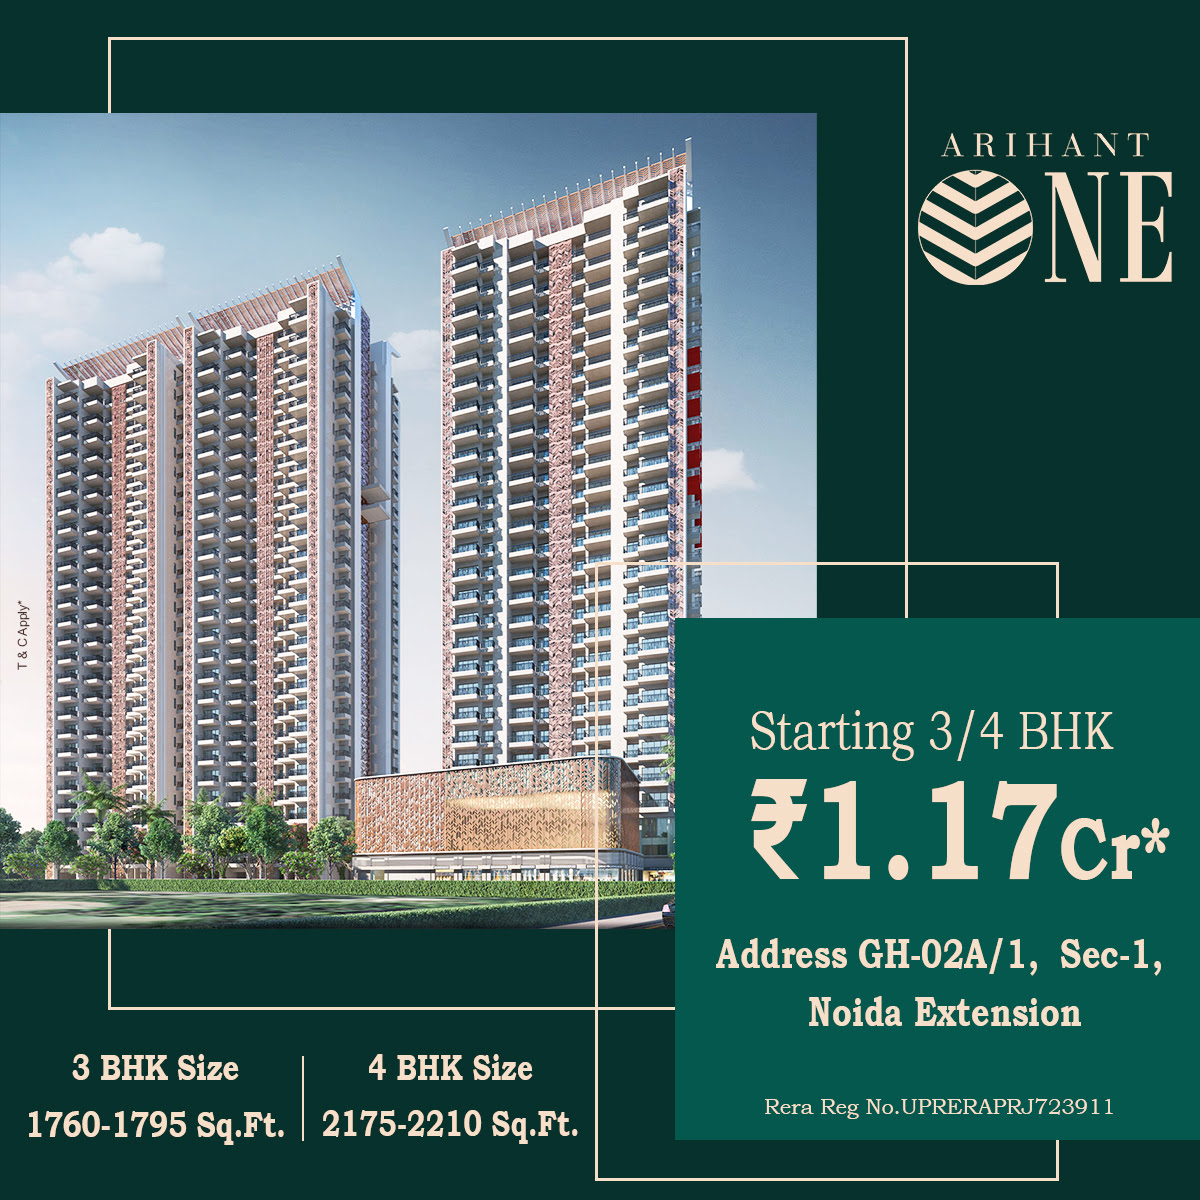 Book 3/4 BHK Flats Rs 1.17 Cr onwards at Arihant One, Greater Noida Update